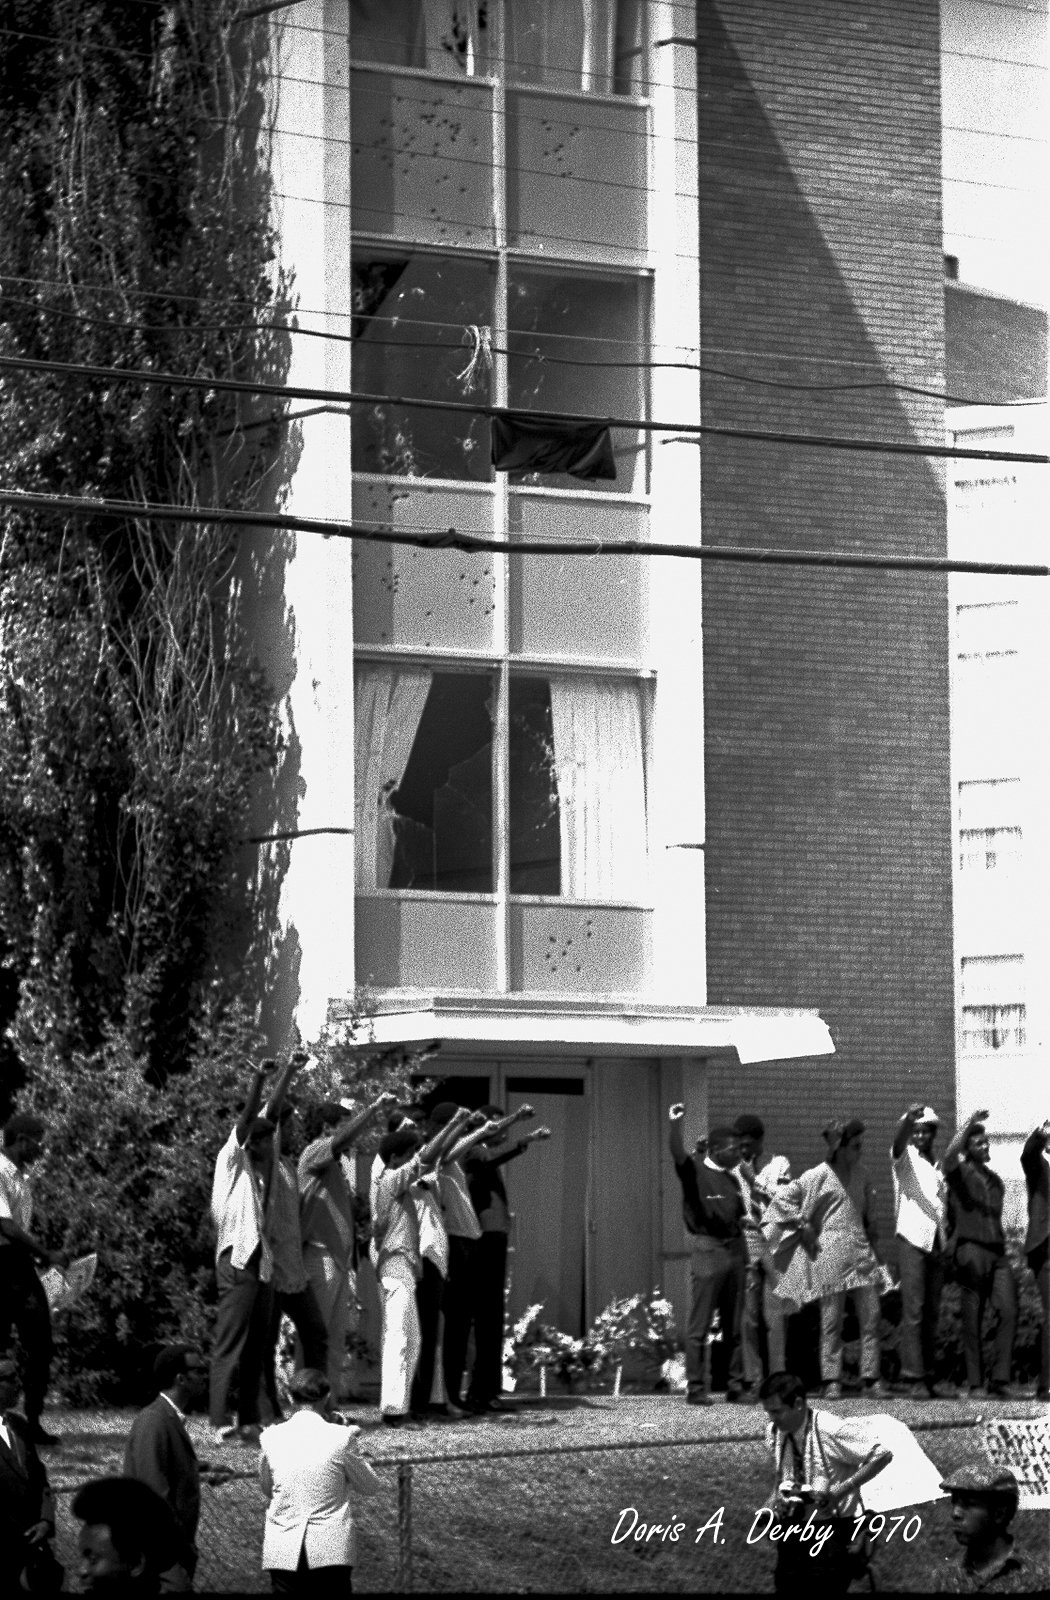 Aftermath of the 1970 Gibbs-Green police shootings at Jackson State (Doris Derby Collection)